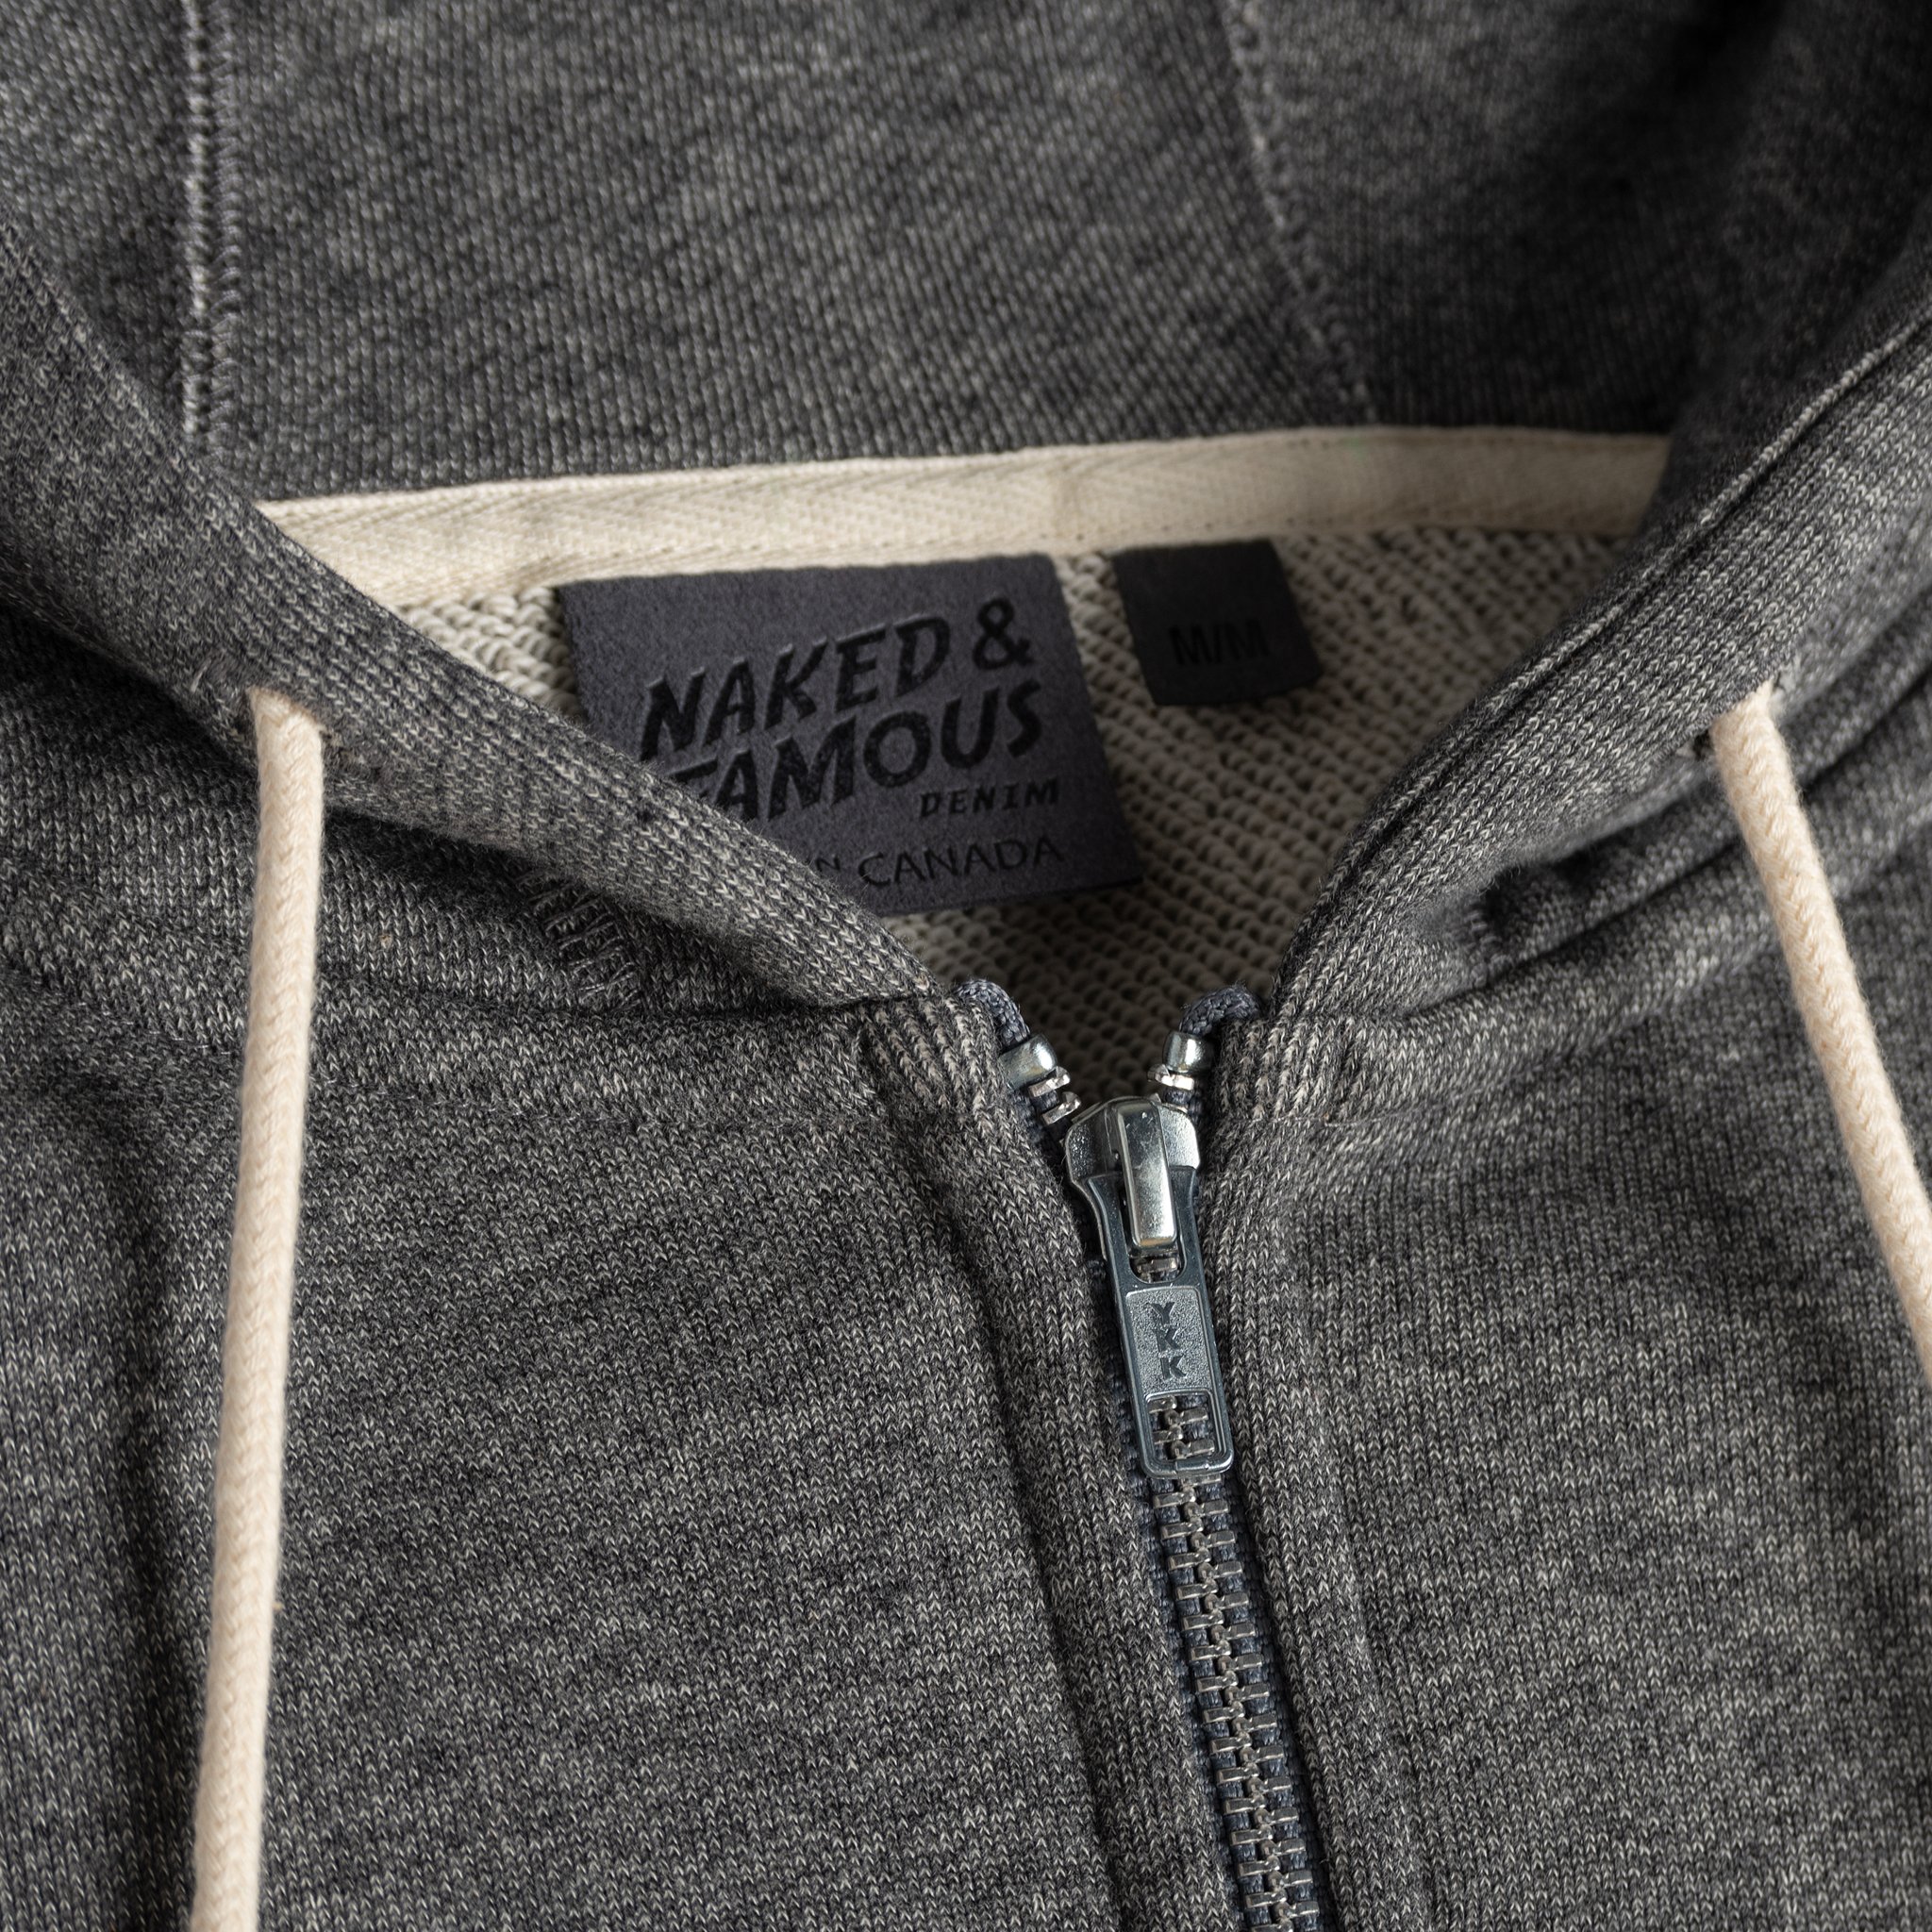  Zip Hoodie - French Terry - Charcoal 